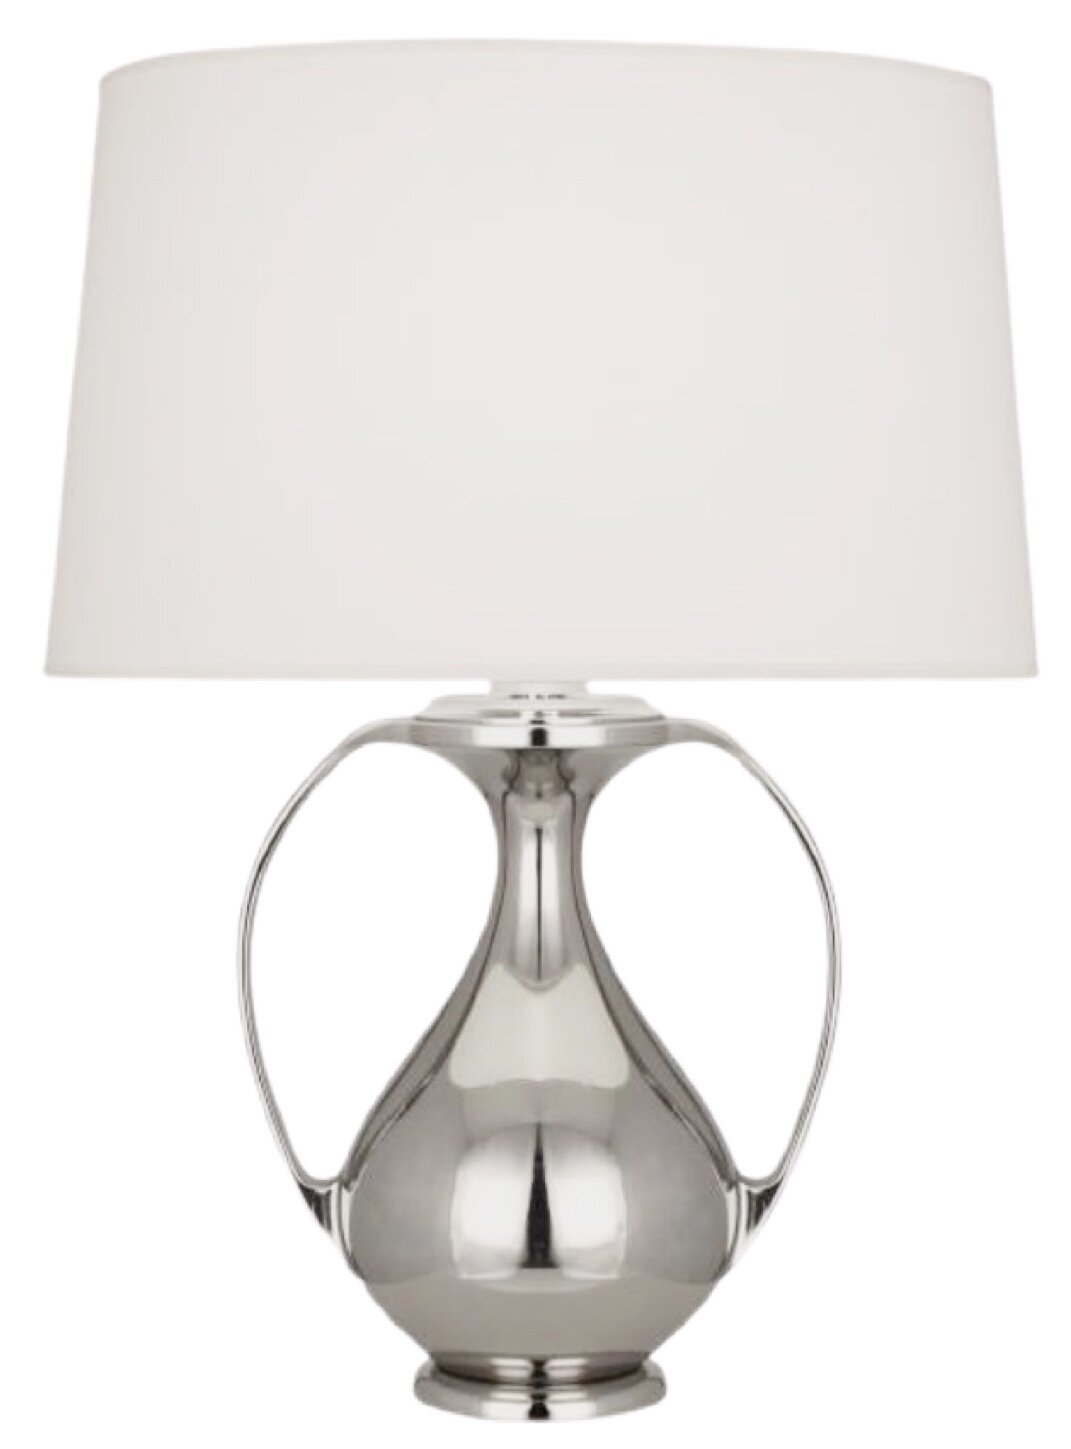 Belvedere table lamp, polished nickel, Robert Abbey.